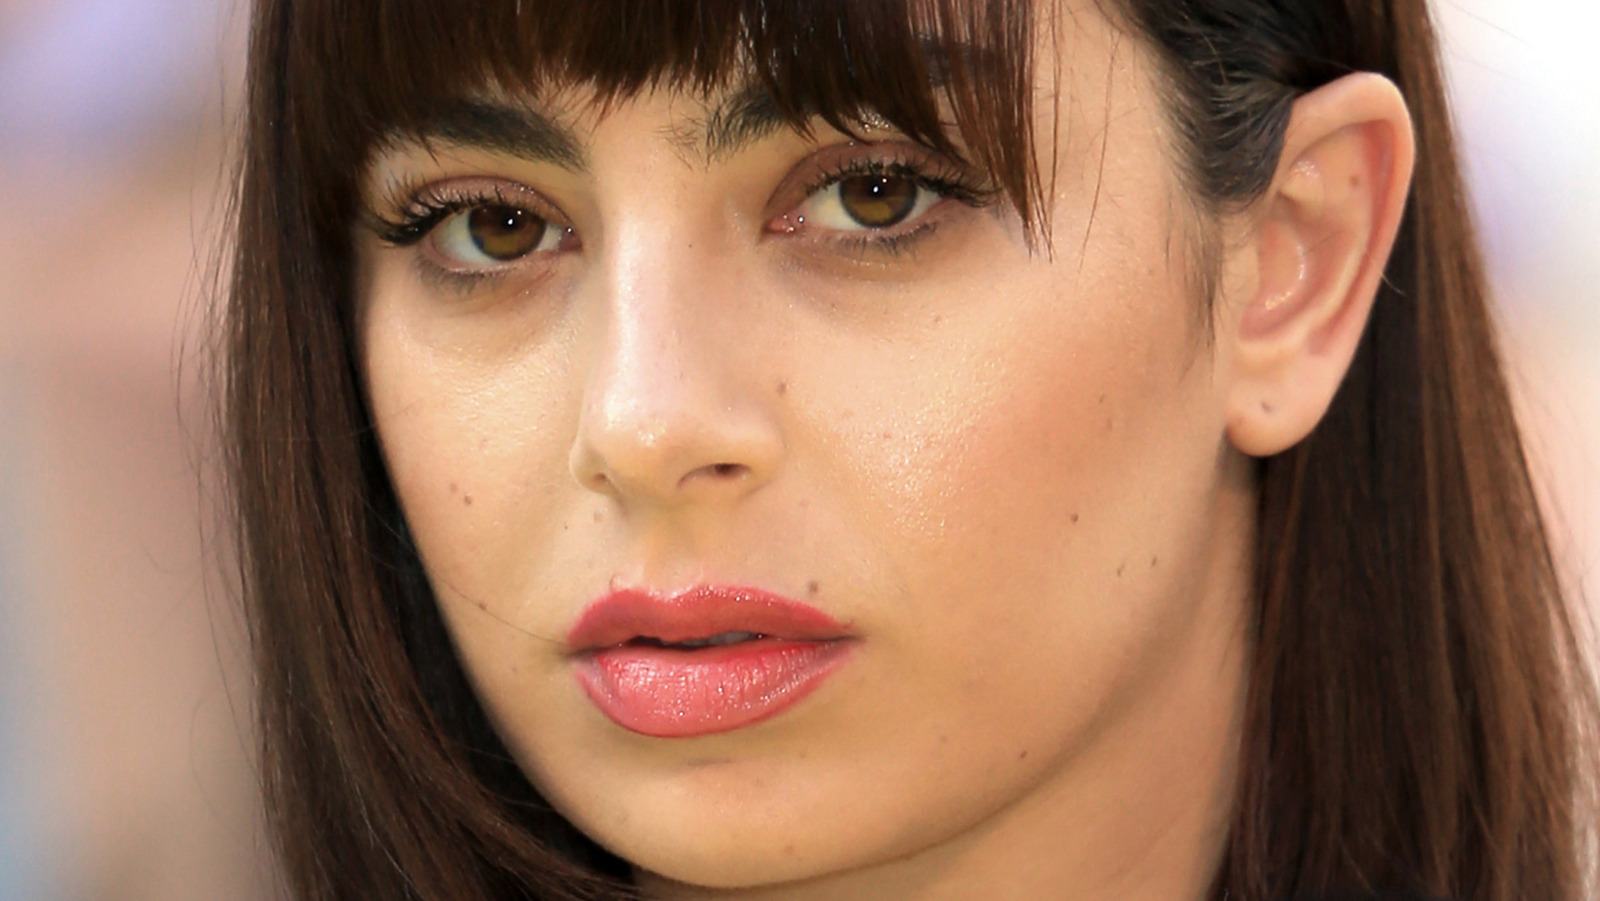 What We Know About CharliXCX’s Love Life